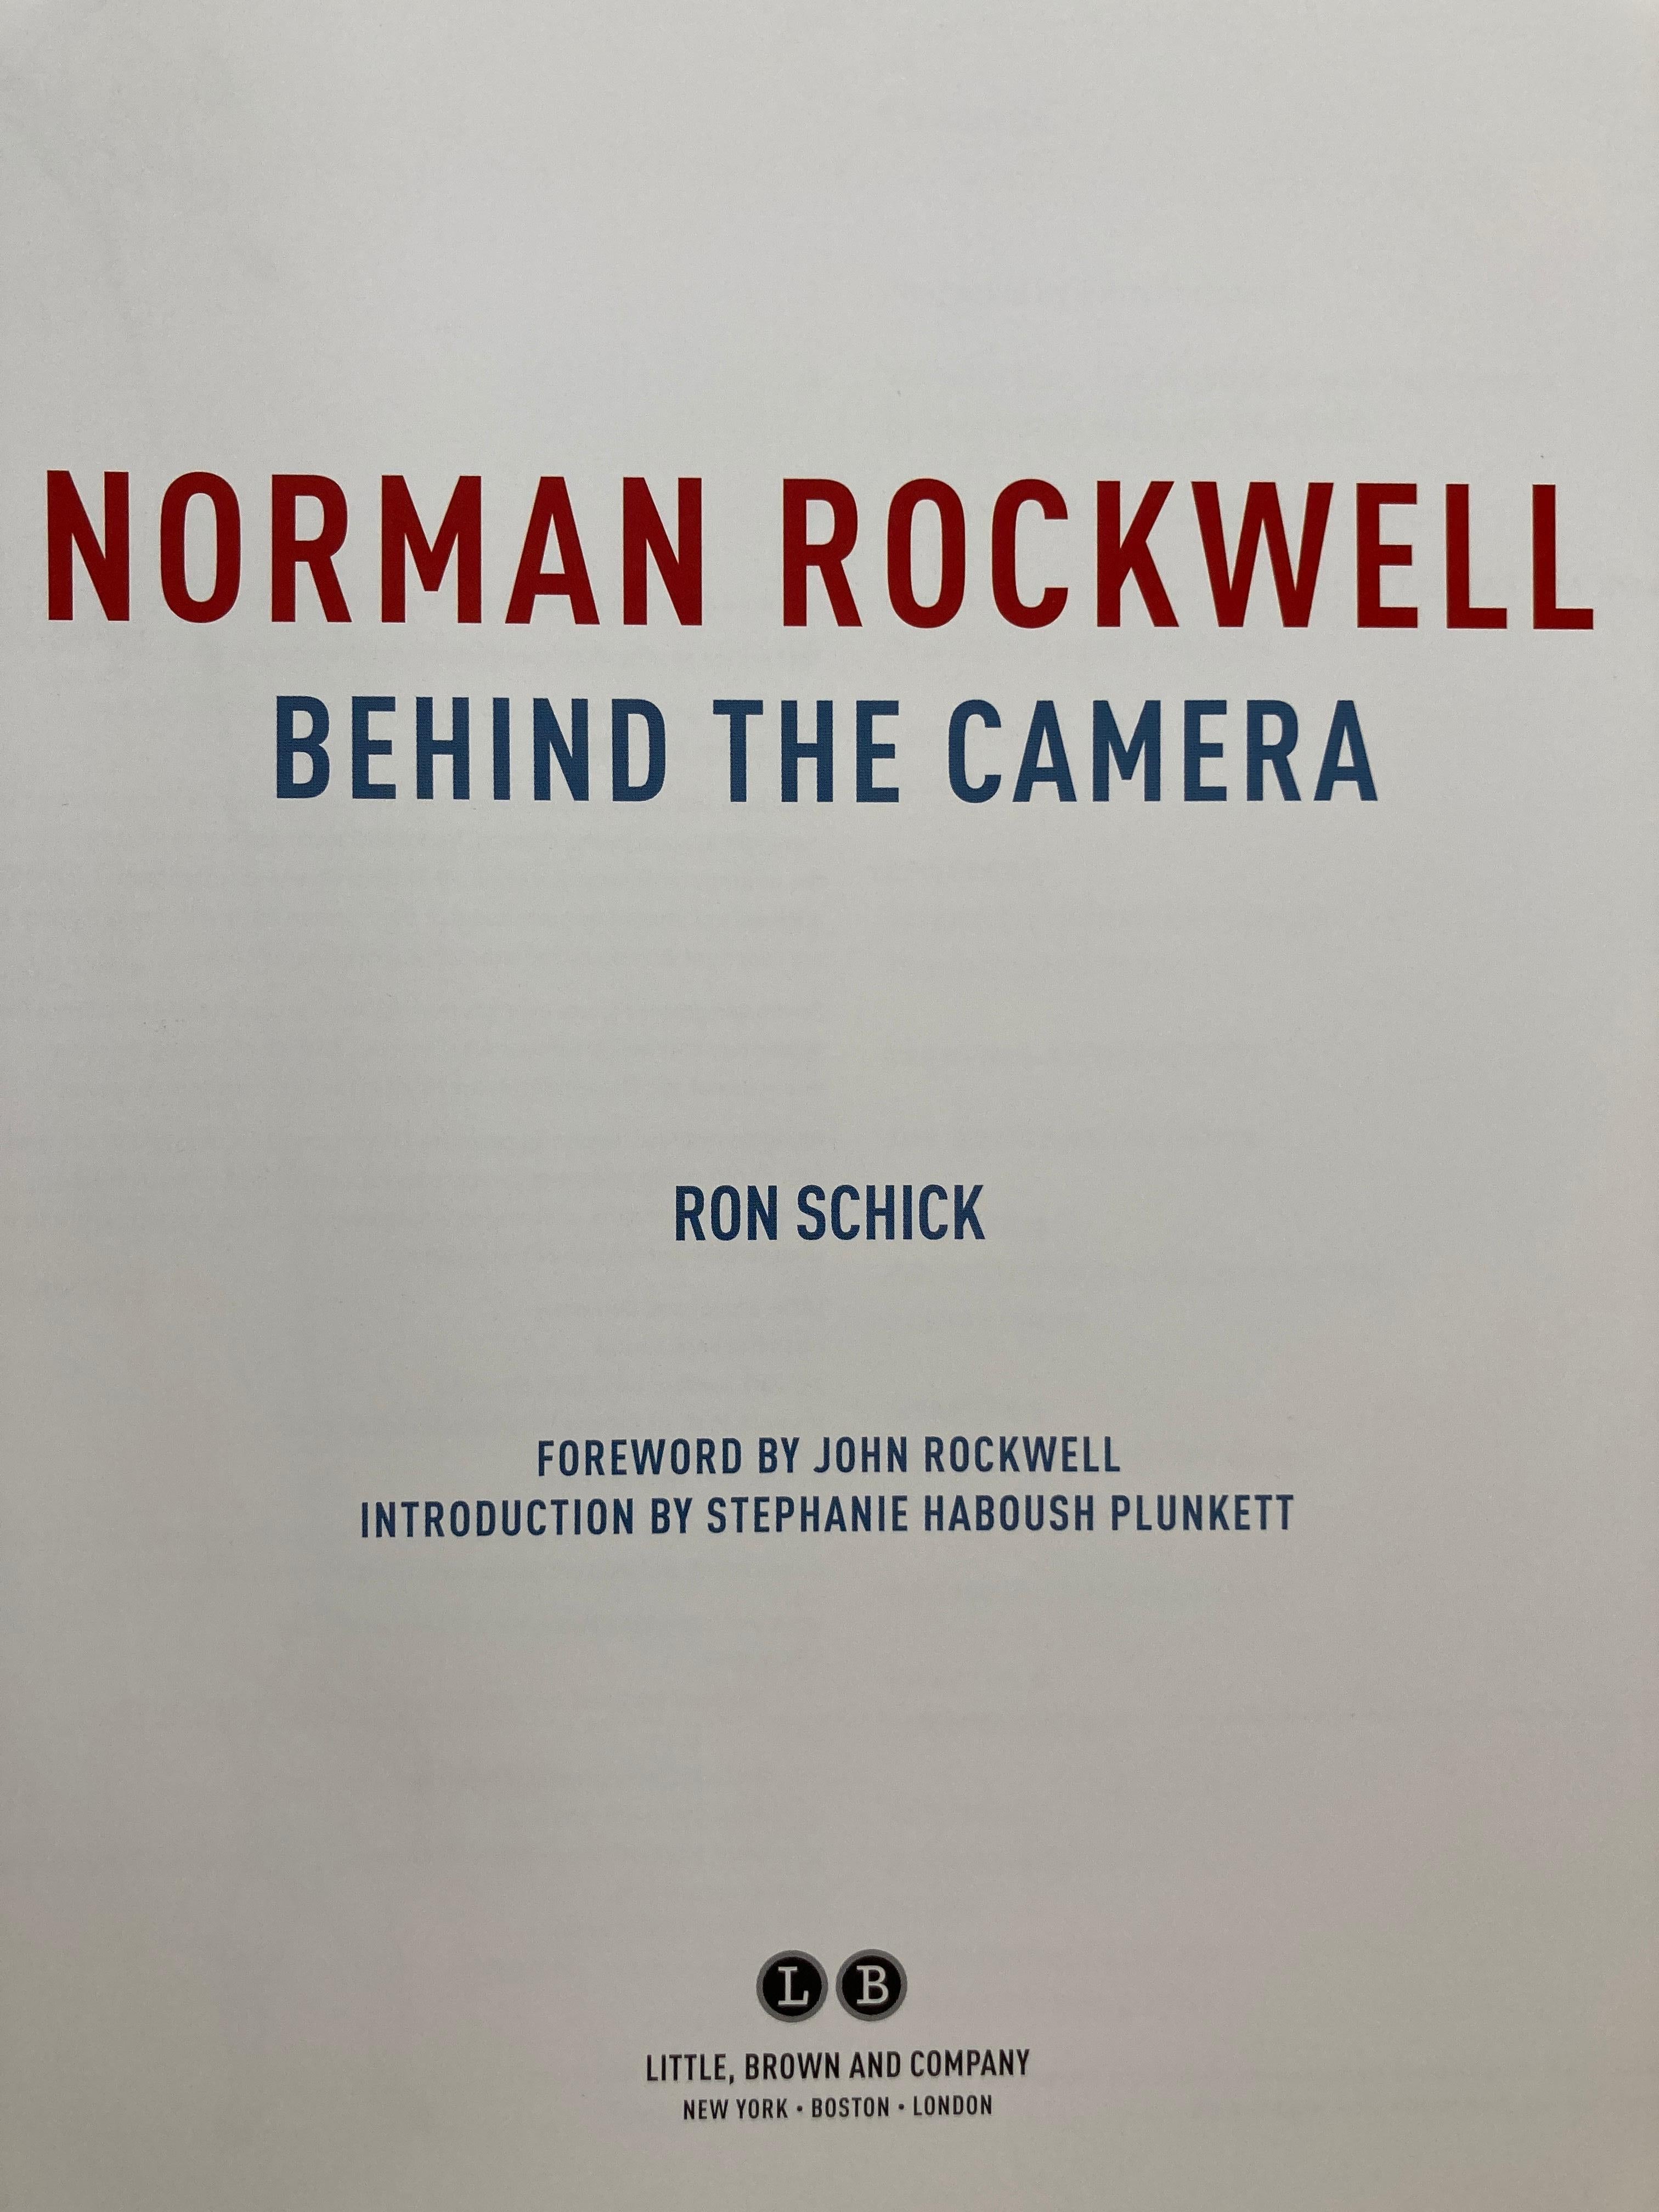 Baroque Norman Rockwell Behind the Camera Book by Norman Rockwell and Ron Schick